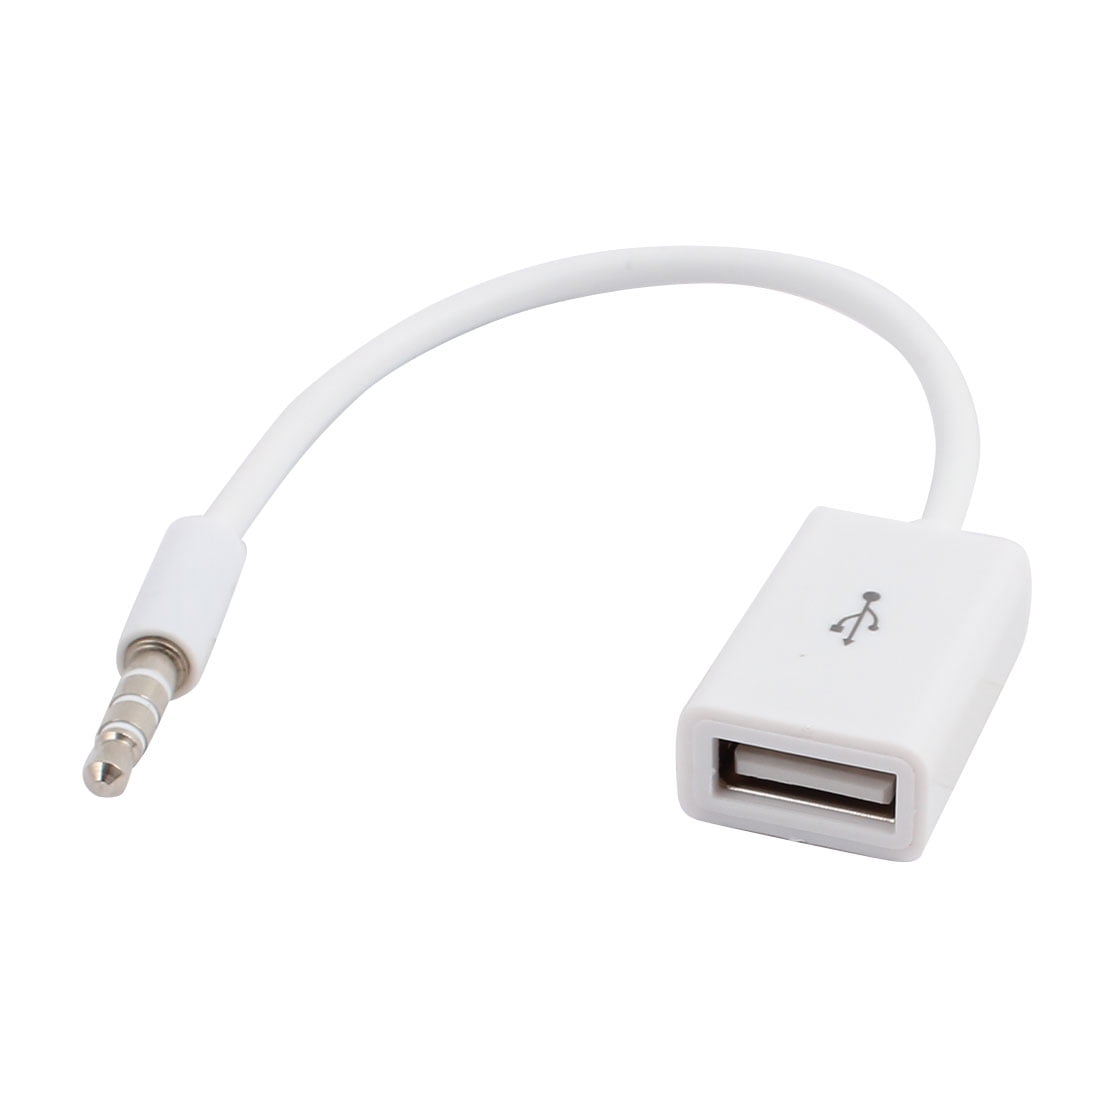 White 3.5mm Male AUX Audio Plug Jack to USB 2.0 Female Converter Adapter Cable 